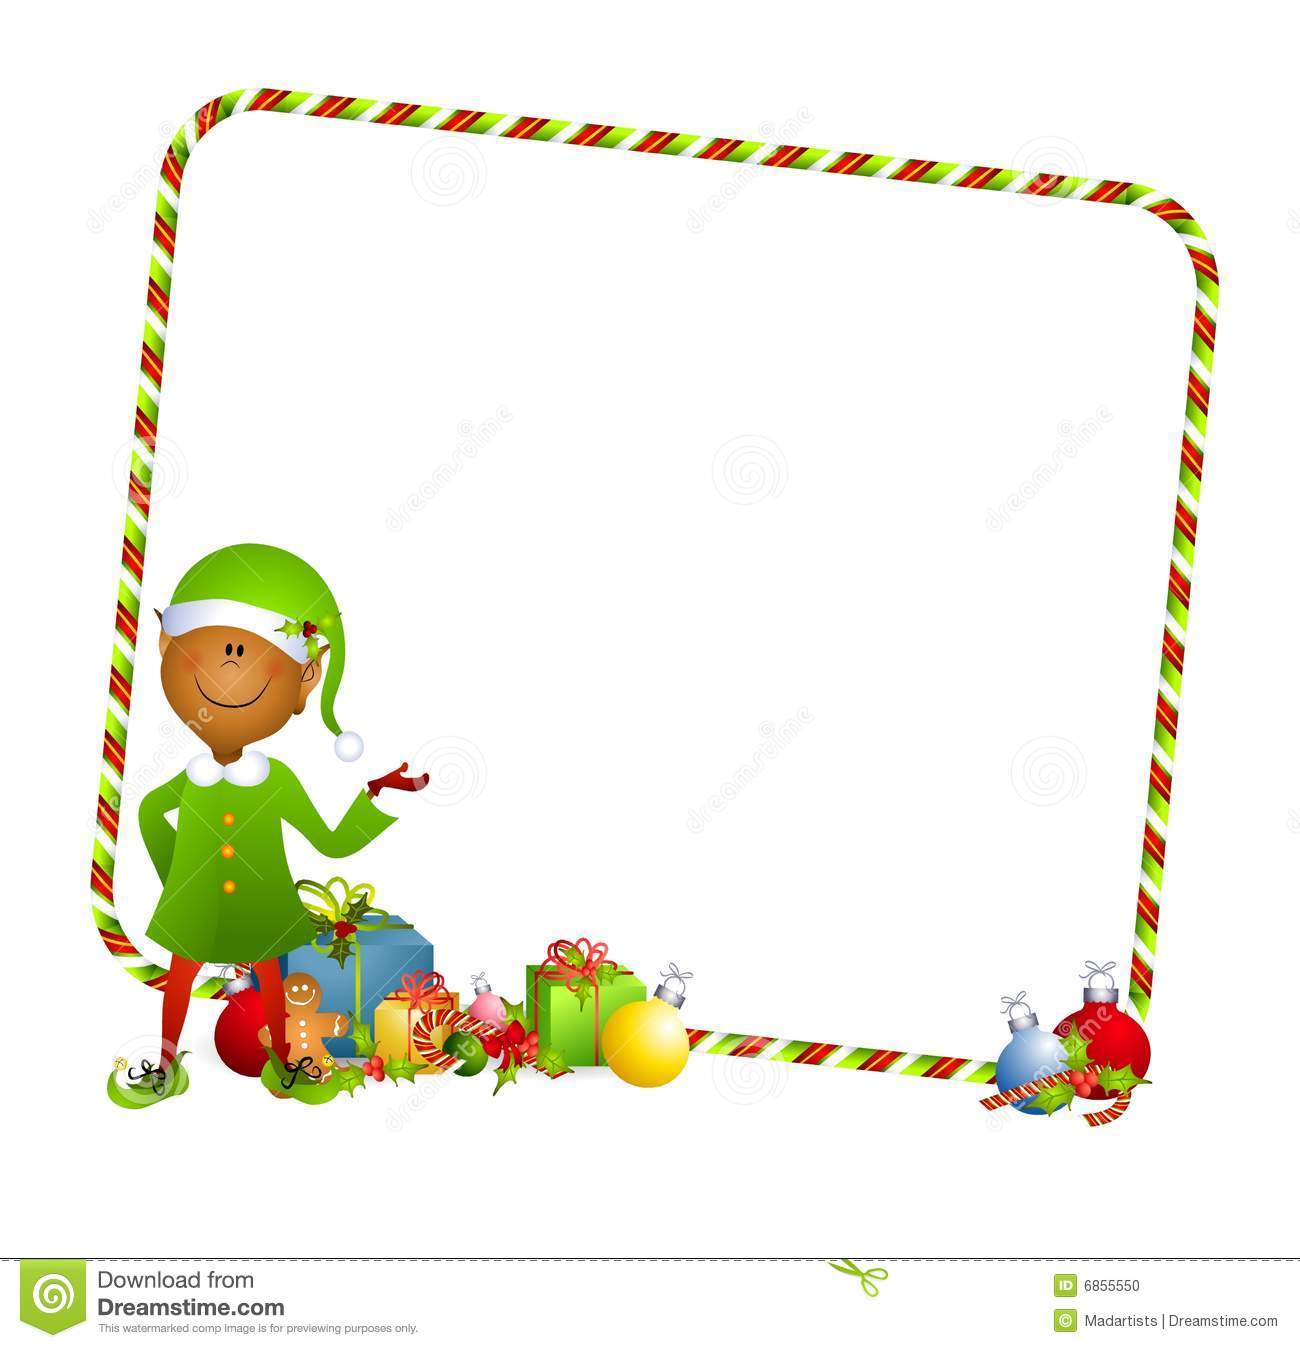 American Christmas Elf With Gifts And Candy Cane Border Orframe